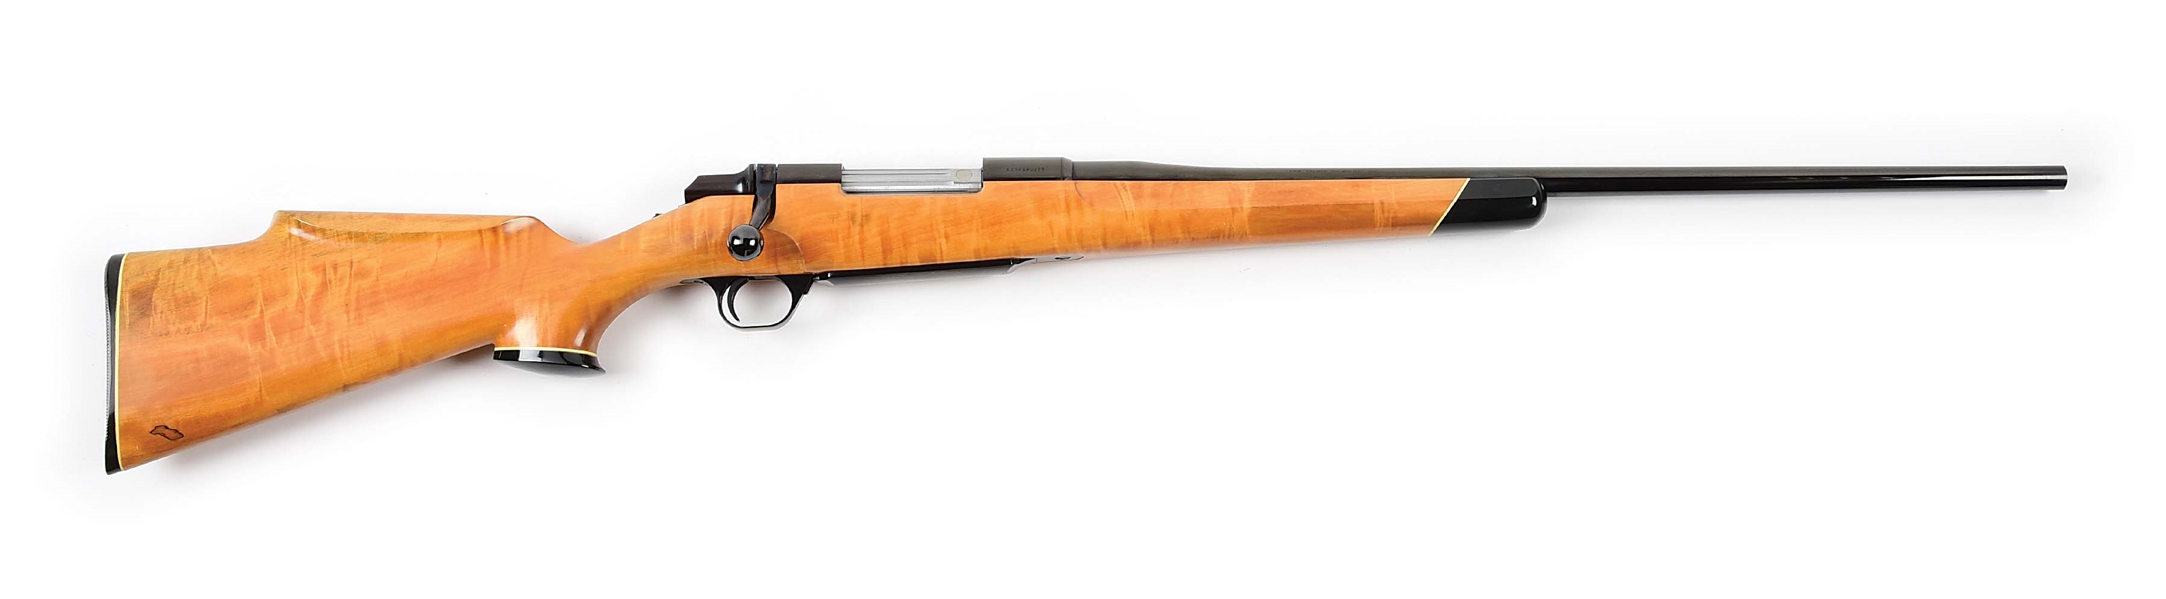 (M) BROWNING BBR BOLT ACTION RIFLE WITH YAMA STOCK.